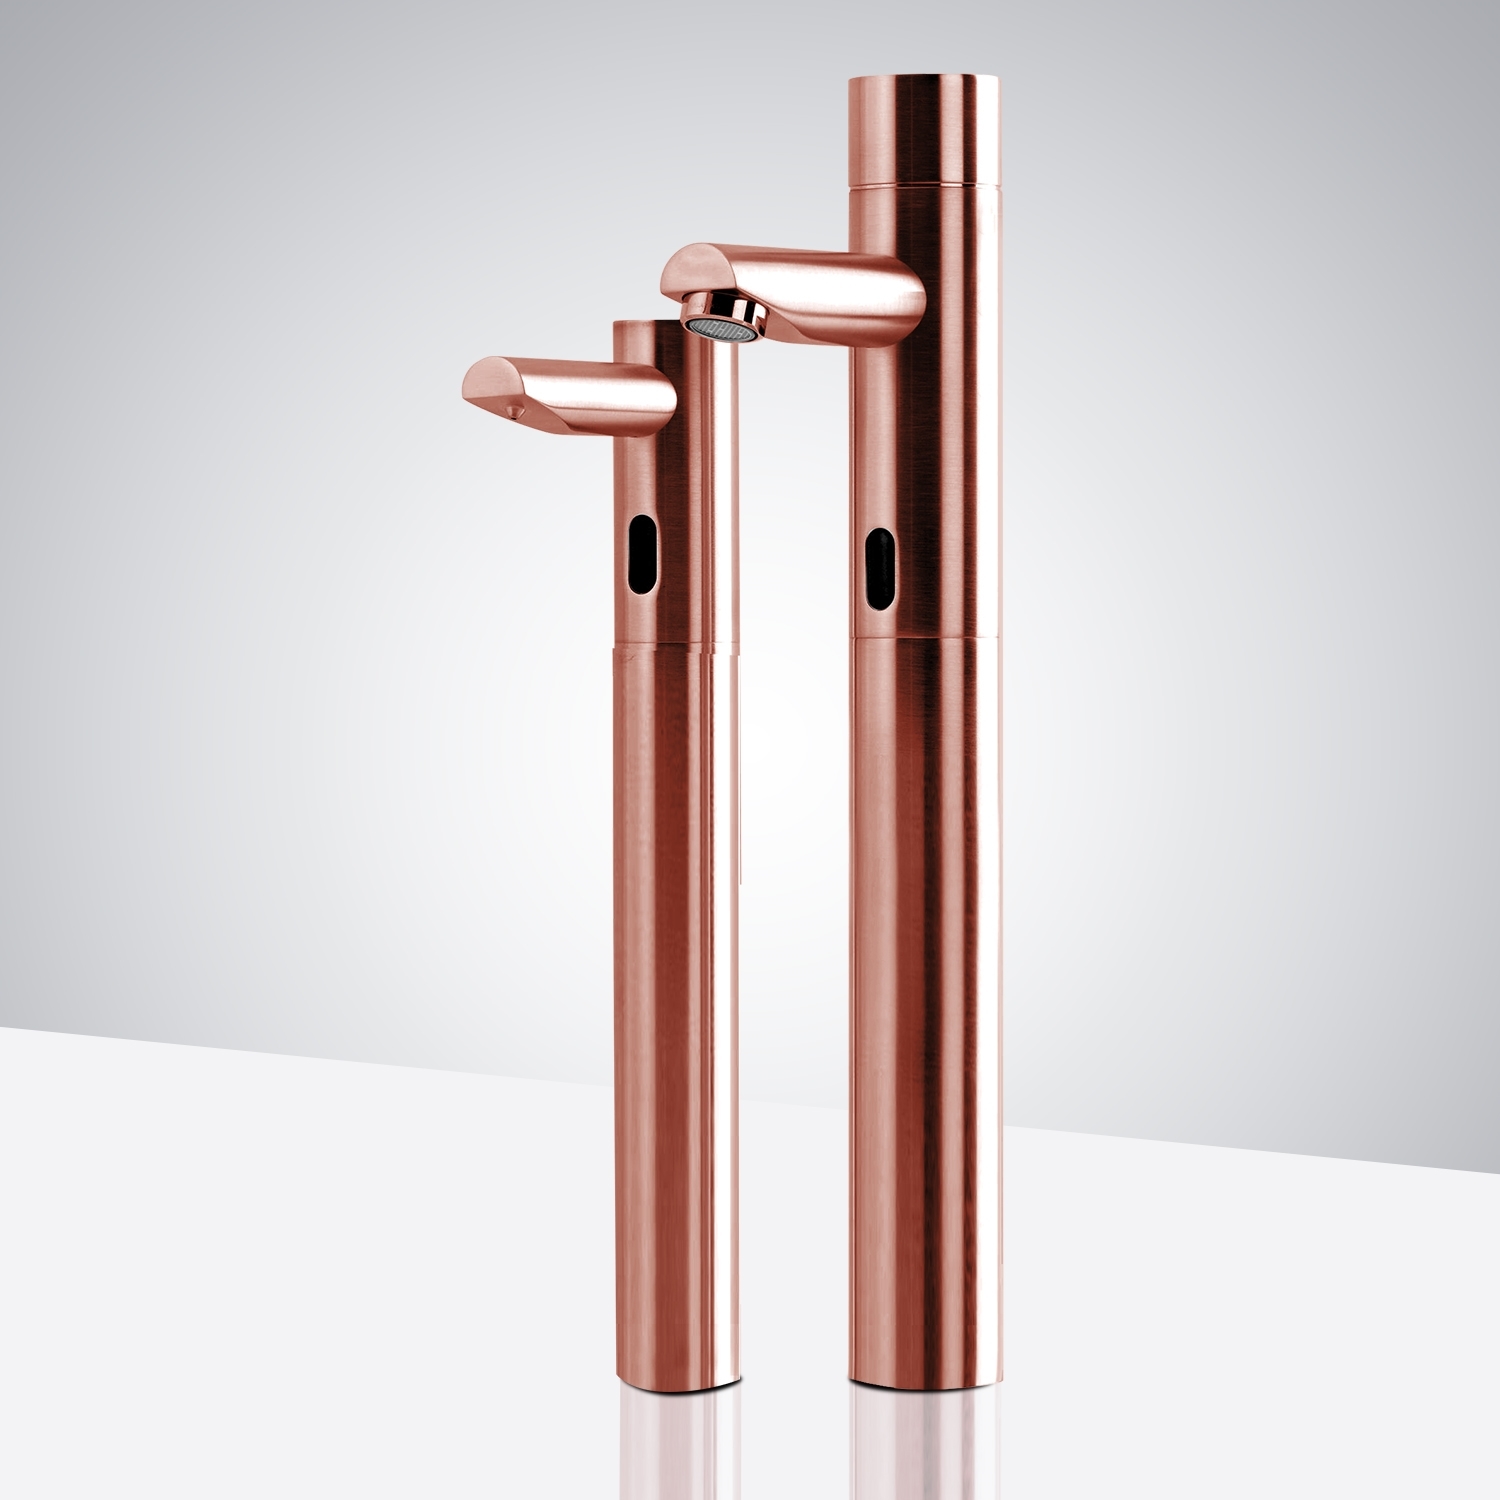 Commercial Rose Gold Automatic Temperature Control Thermostatic Sensor Tap and Matching Soap Dispenser